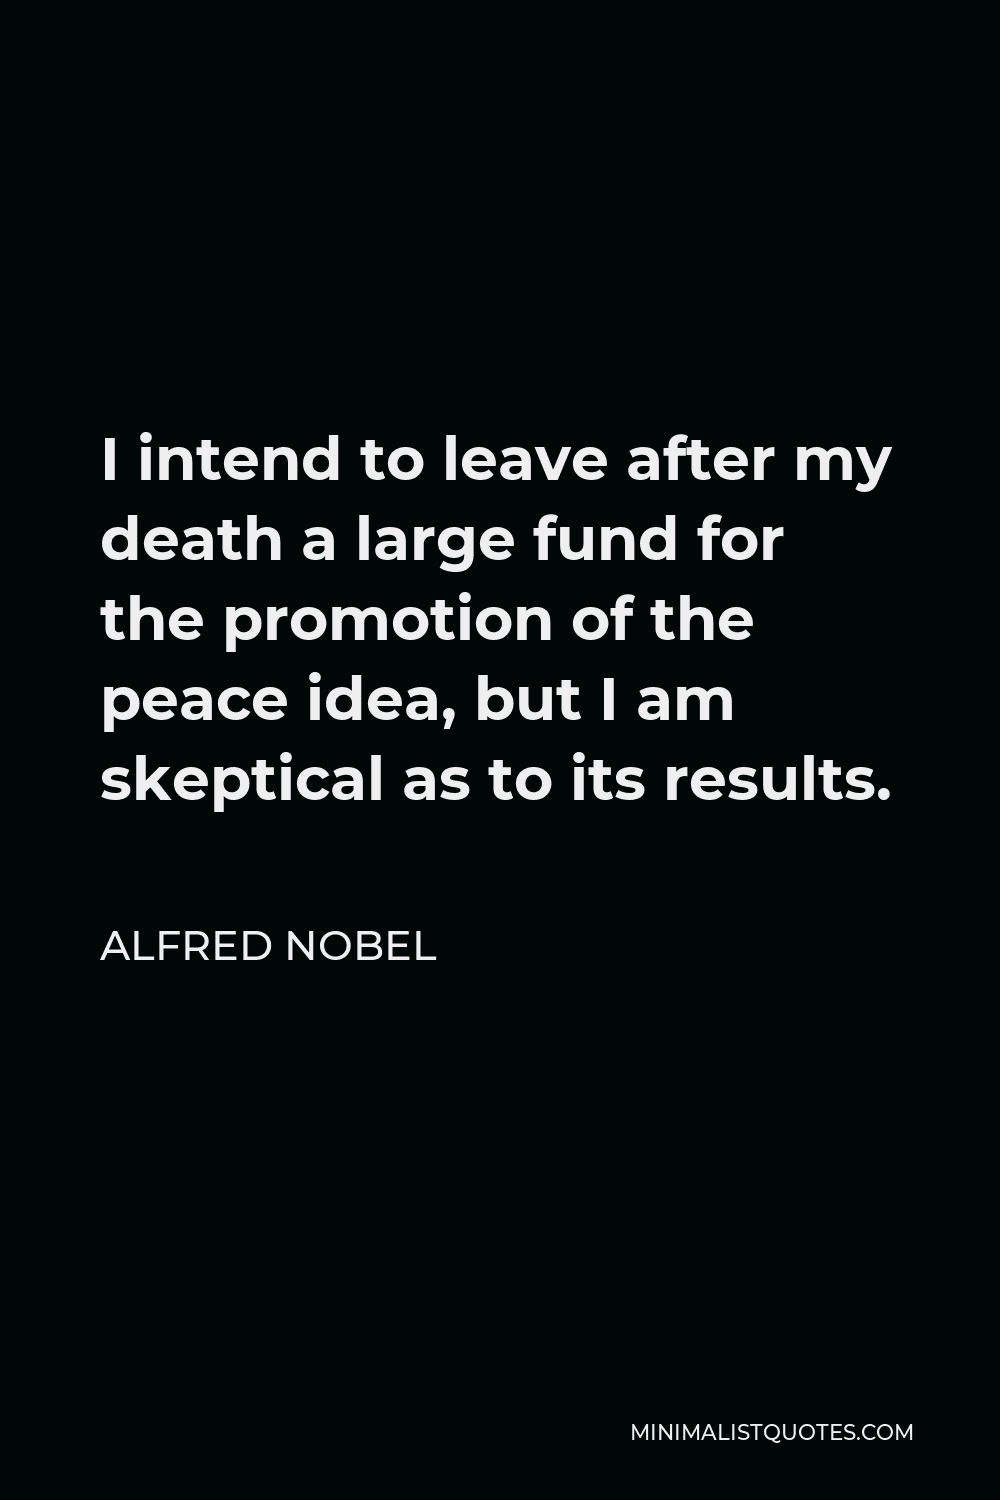 Alfred Nobel Quote - I intend to leave after my death a large fund for the promotion of the peace idea, but I am skeptical as to its results.